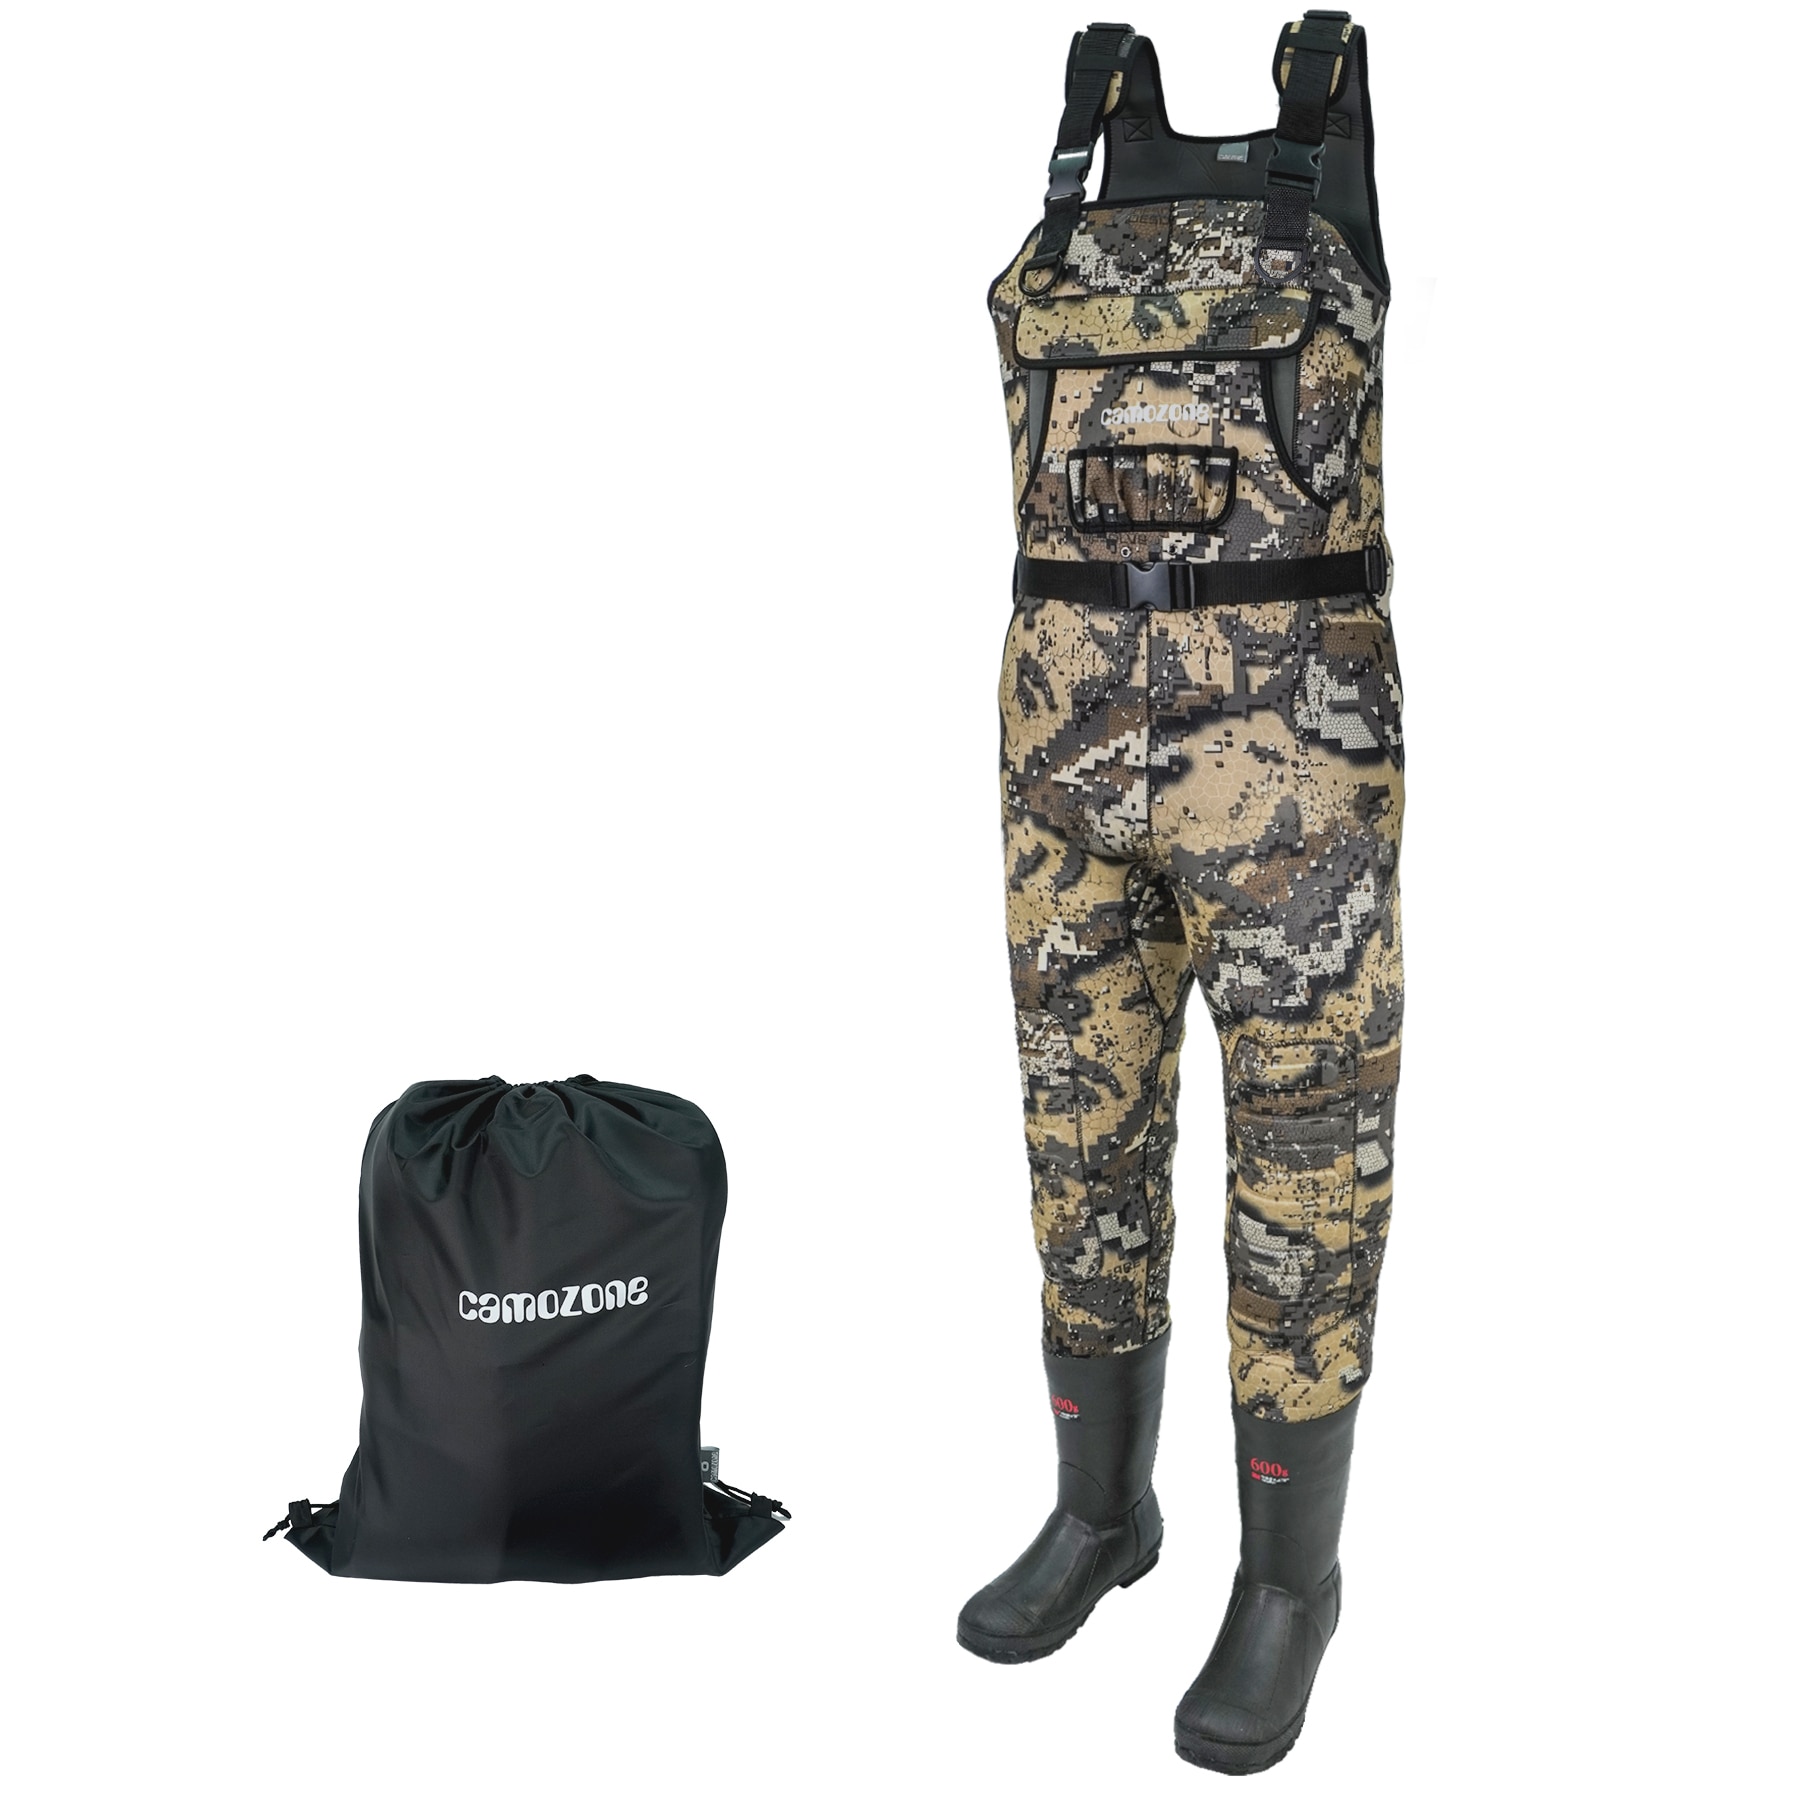 CAMOZONE Neoprene Chest Waders with Boots-size10 Unisex Fishing Jacket in  the Fishing Gear & Apparel department at